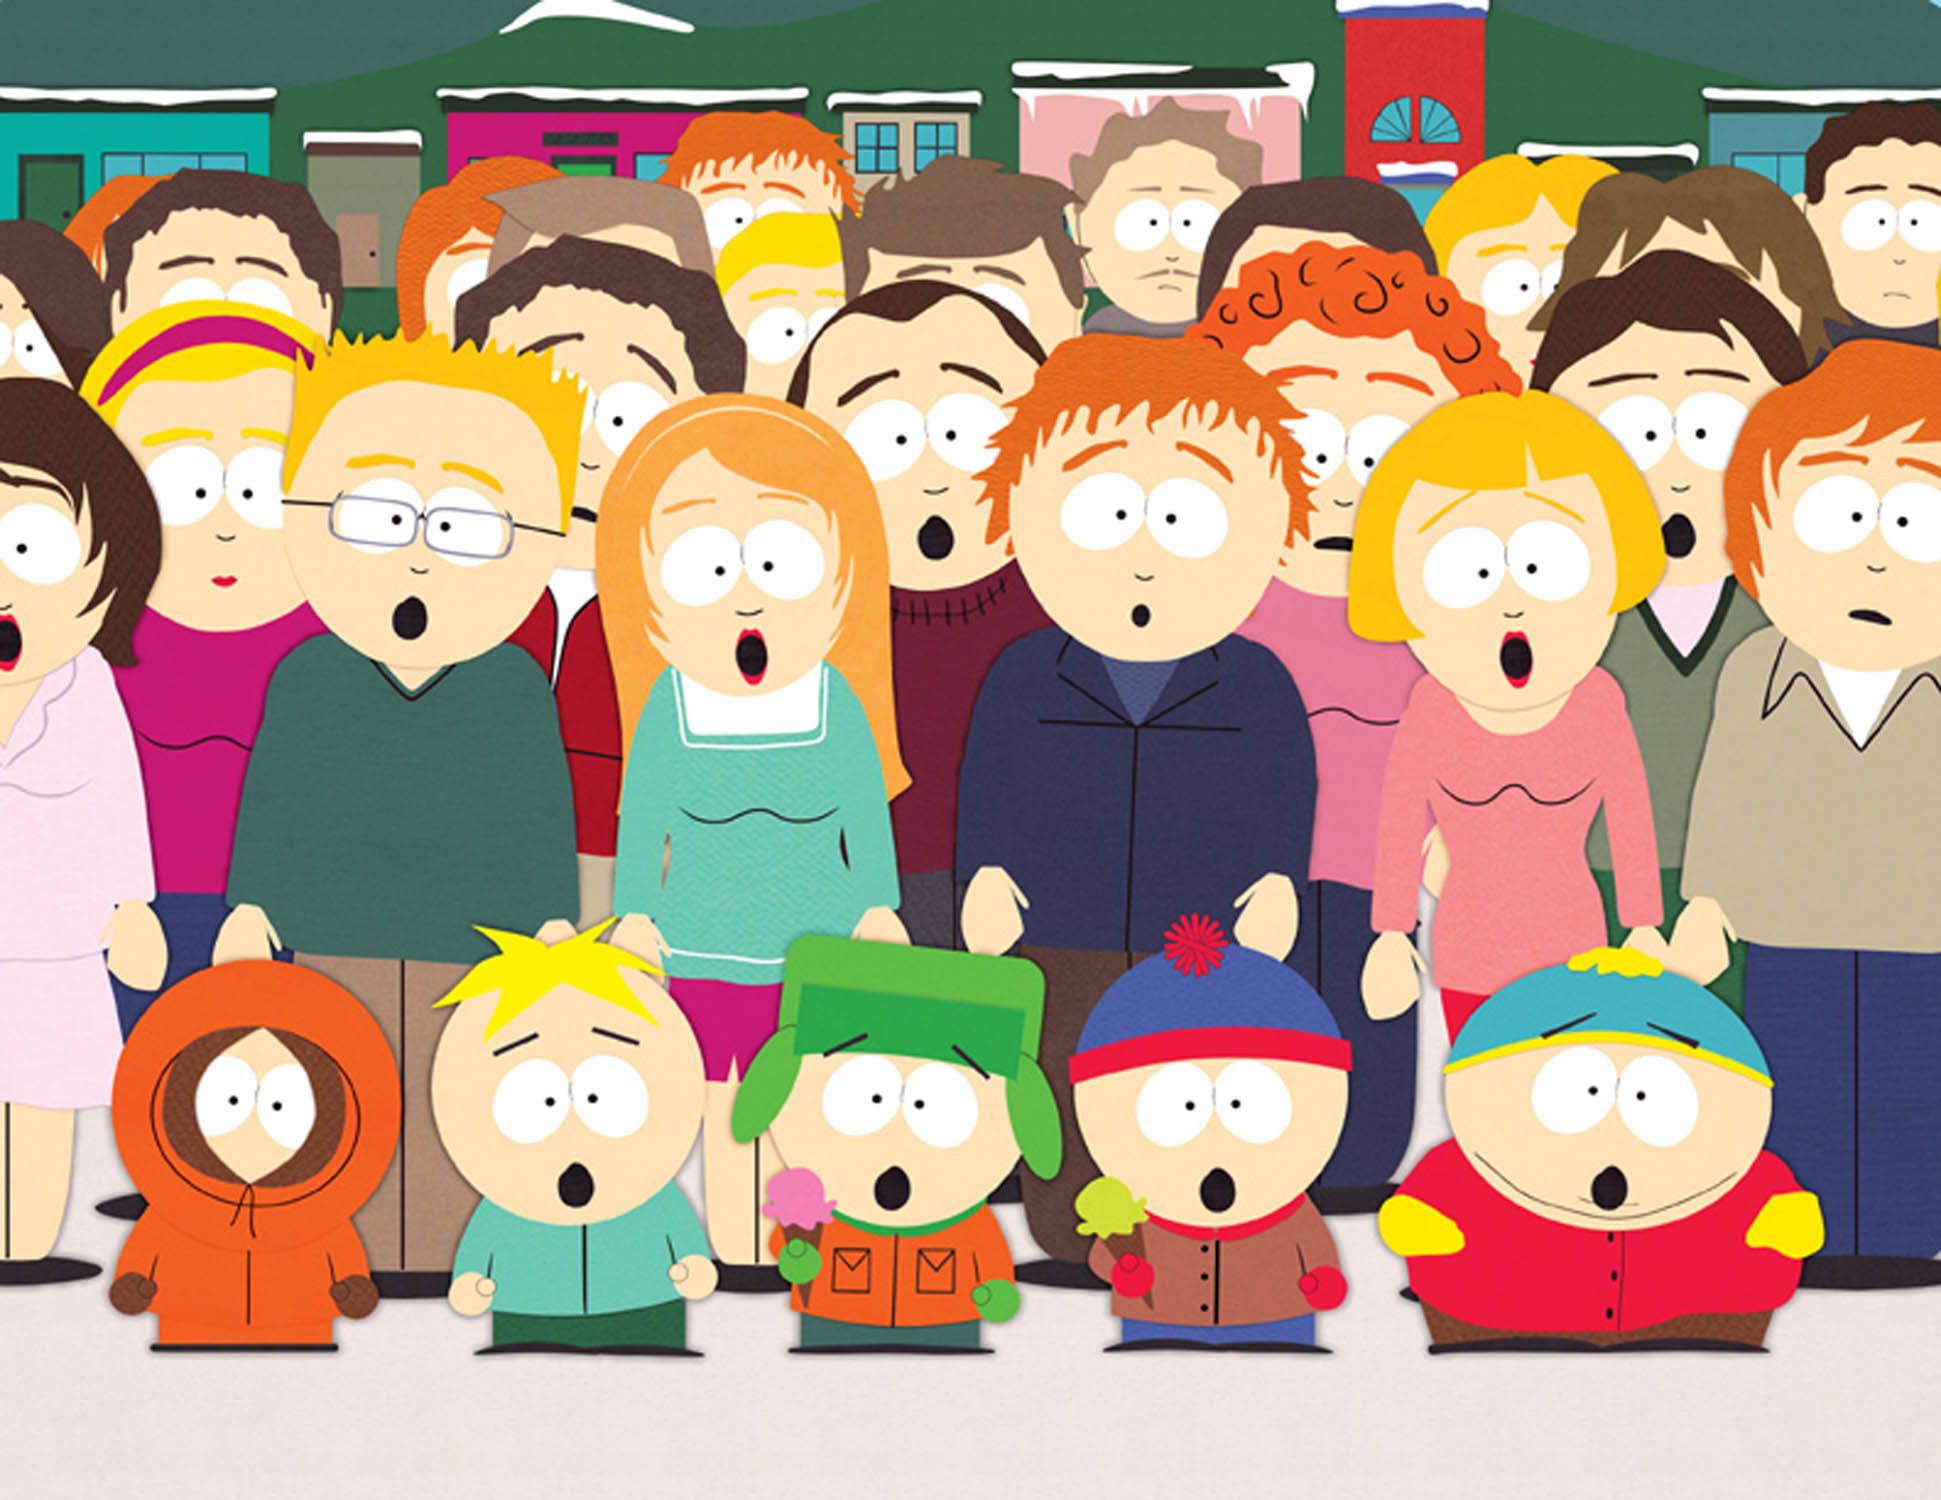 South Park' Creators Trey Parker and Matt Stone Aren't Surprised These  Characters Never Took Off